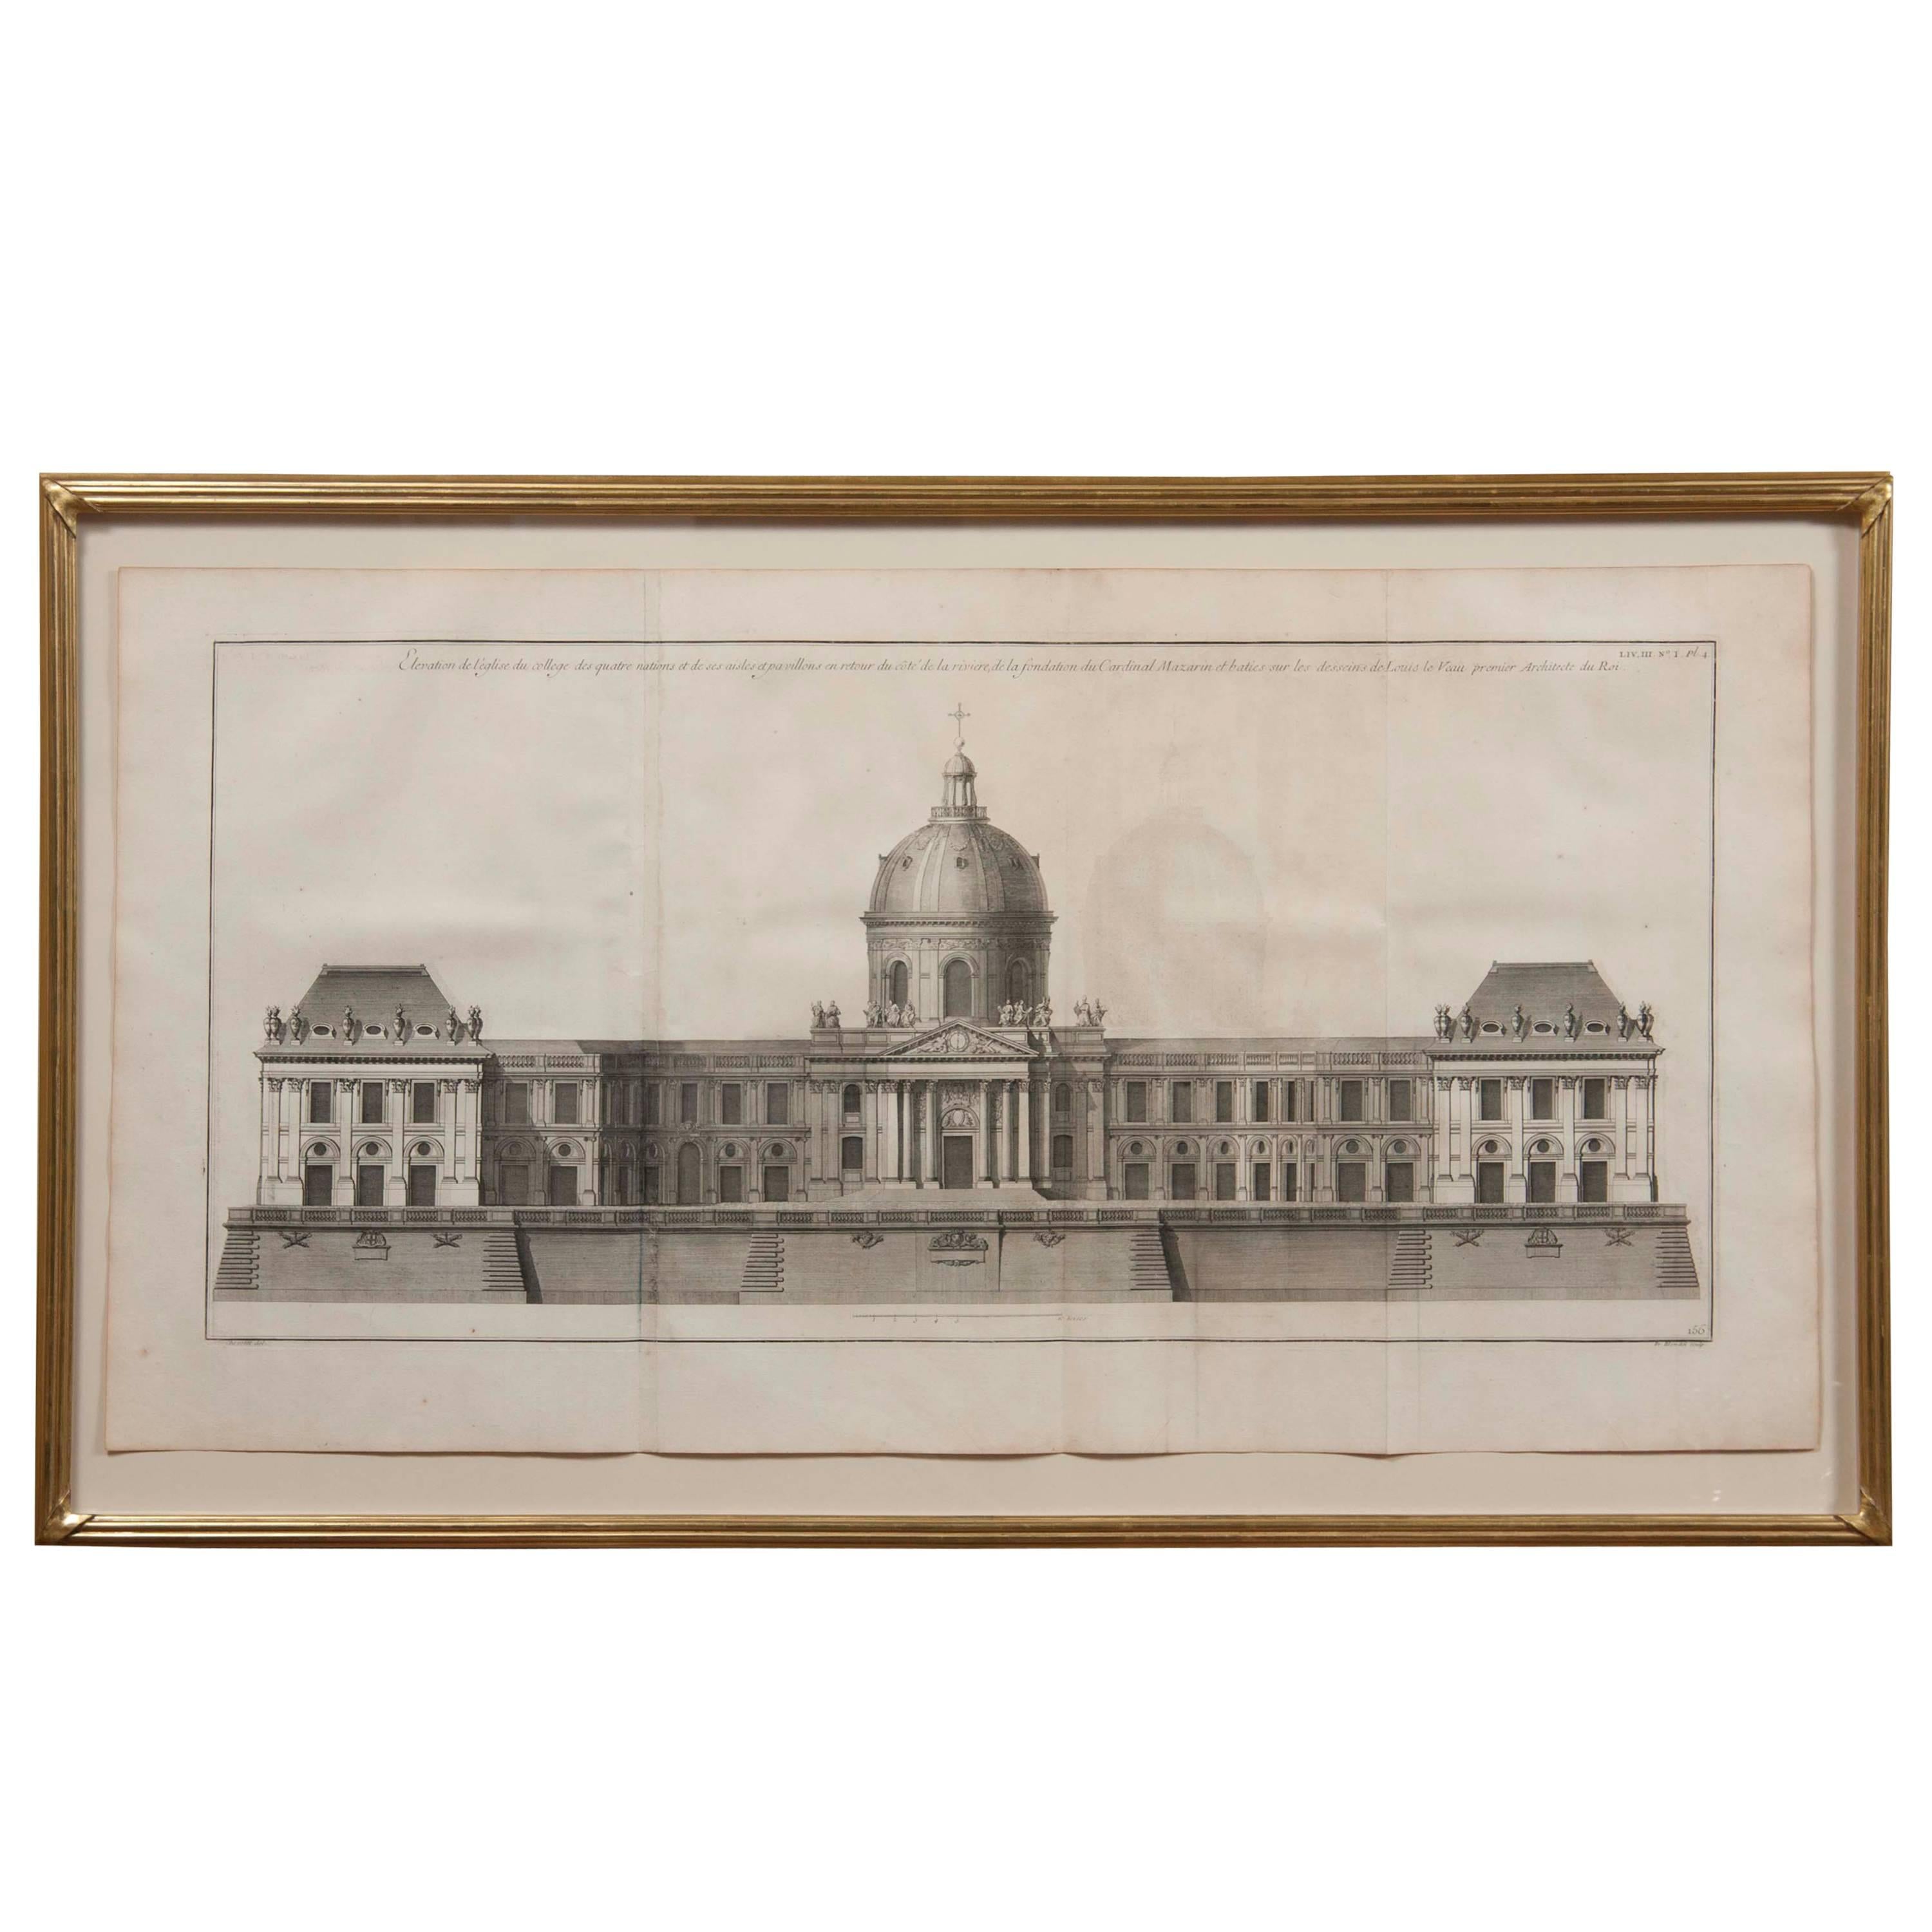 French Engraving "Institute de France"